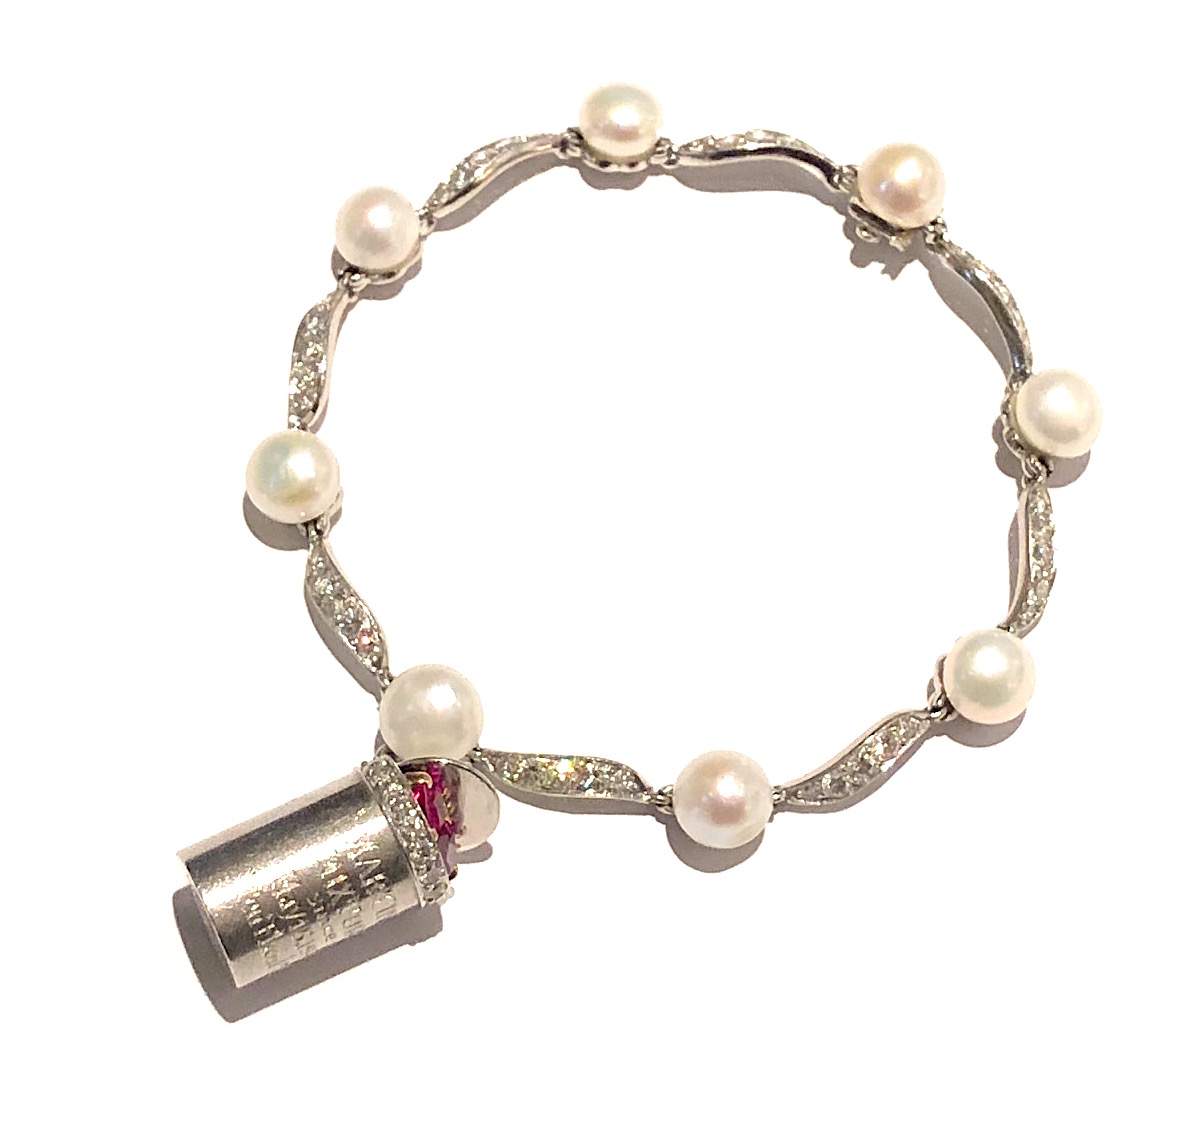 William Ruser  Los Angeles “Charisse” 10 year anniversary bracelet, 1958 platinum set with diamonds and 8 pearls and further set with a double ruby heart charm that was given to Cyd Charisse by Tony Martin for their 10th wedding anniversary on May 15, 1958.  It is engraved: Martin’s Mixture since May 15, 1948 Ten Fluid Years “Taint Tin” (They were married for 60 years) Signed and marked: Ruser, Made in California, 10% irid Plat